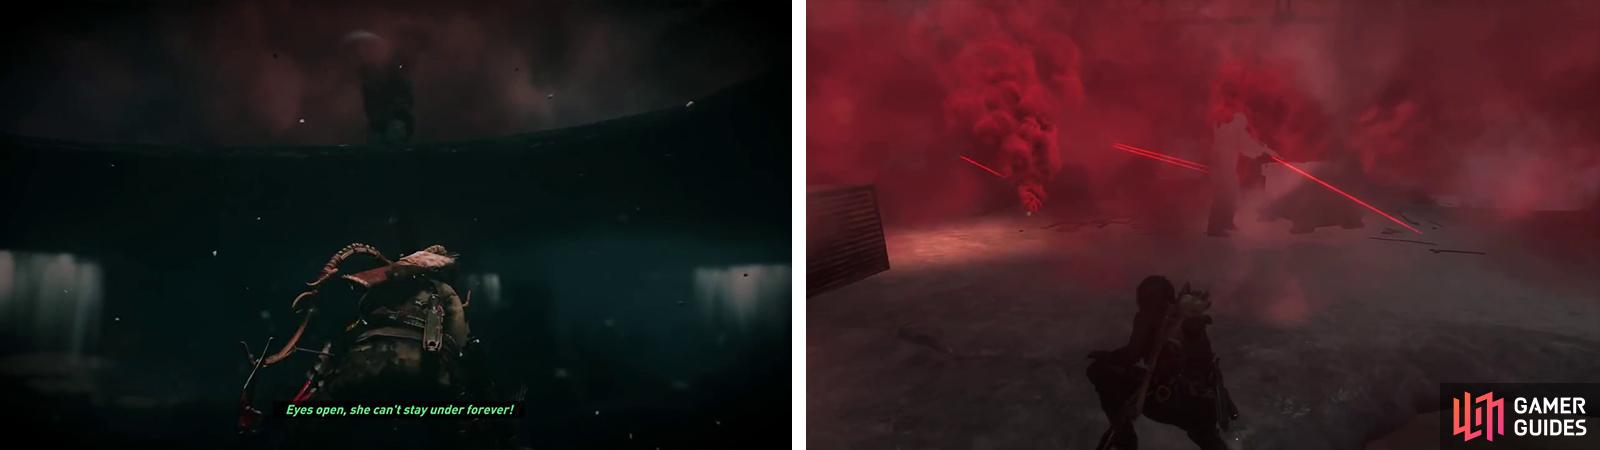 Use the holes in the ice to swim up and take down enemies (left). You can also hop out and use the smoke as cover to perform hit and run attacks (right).